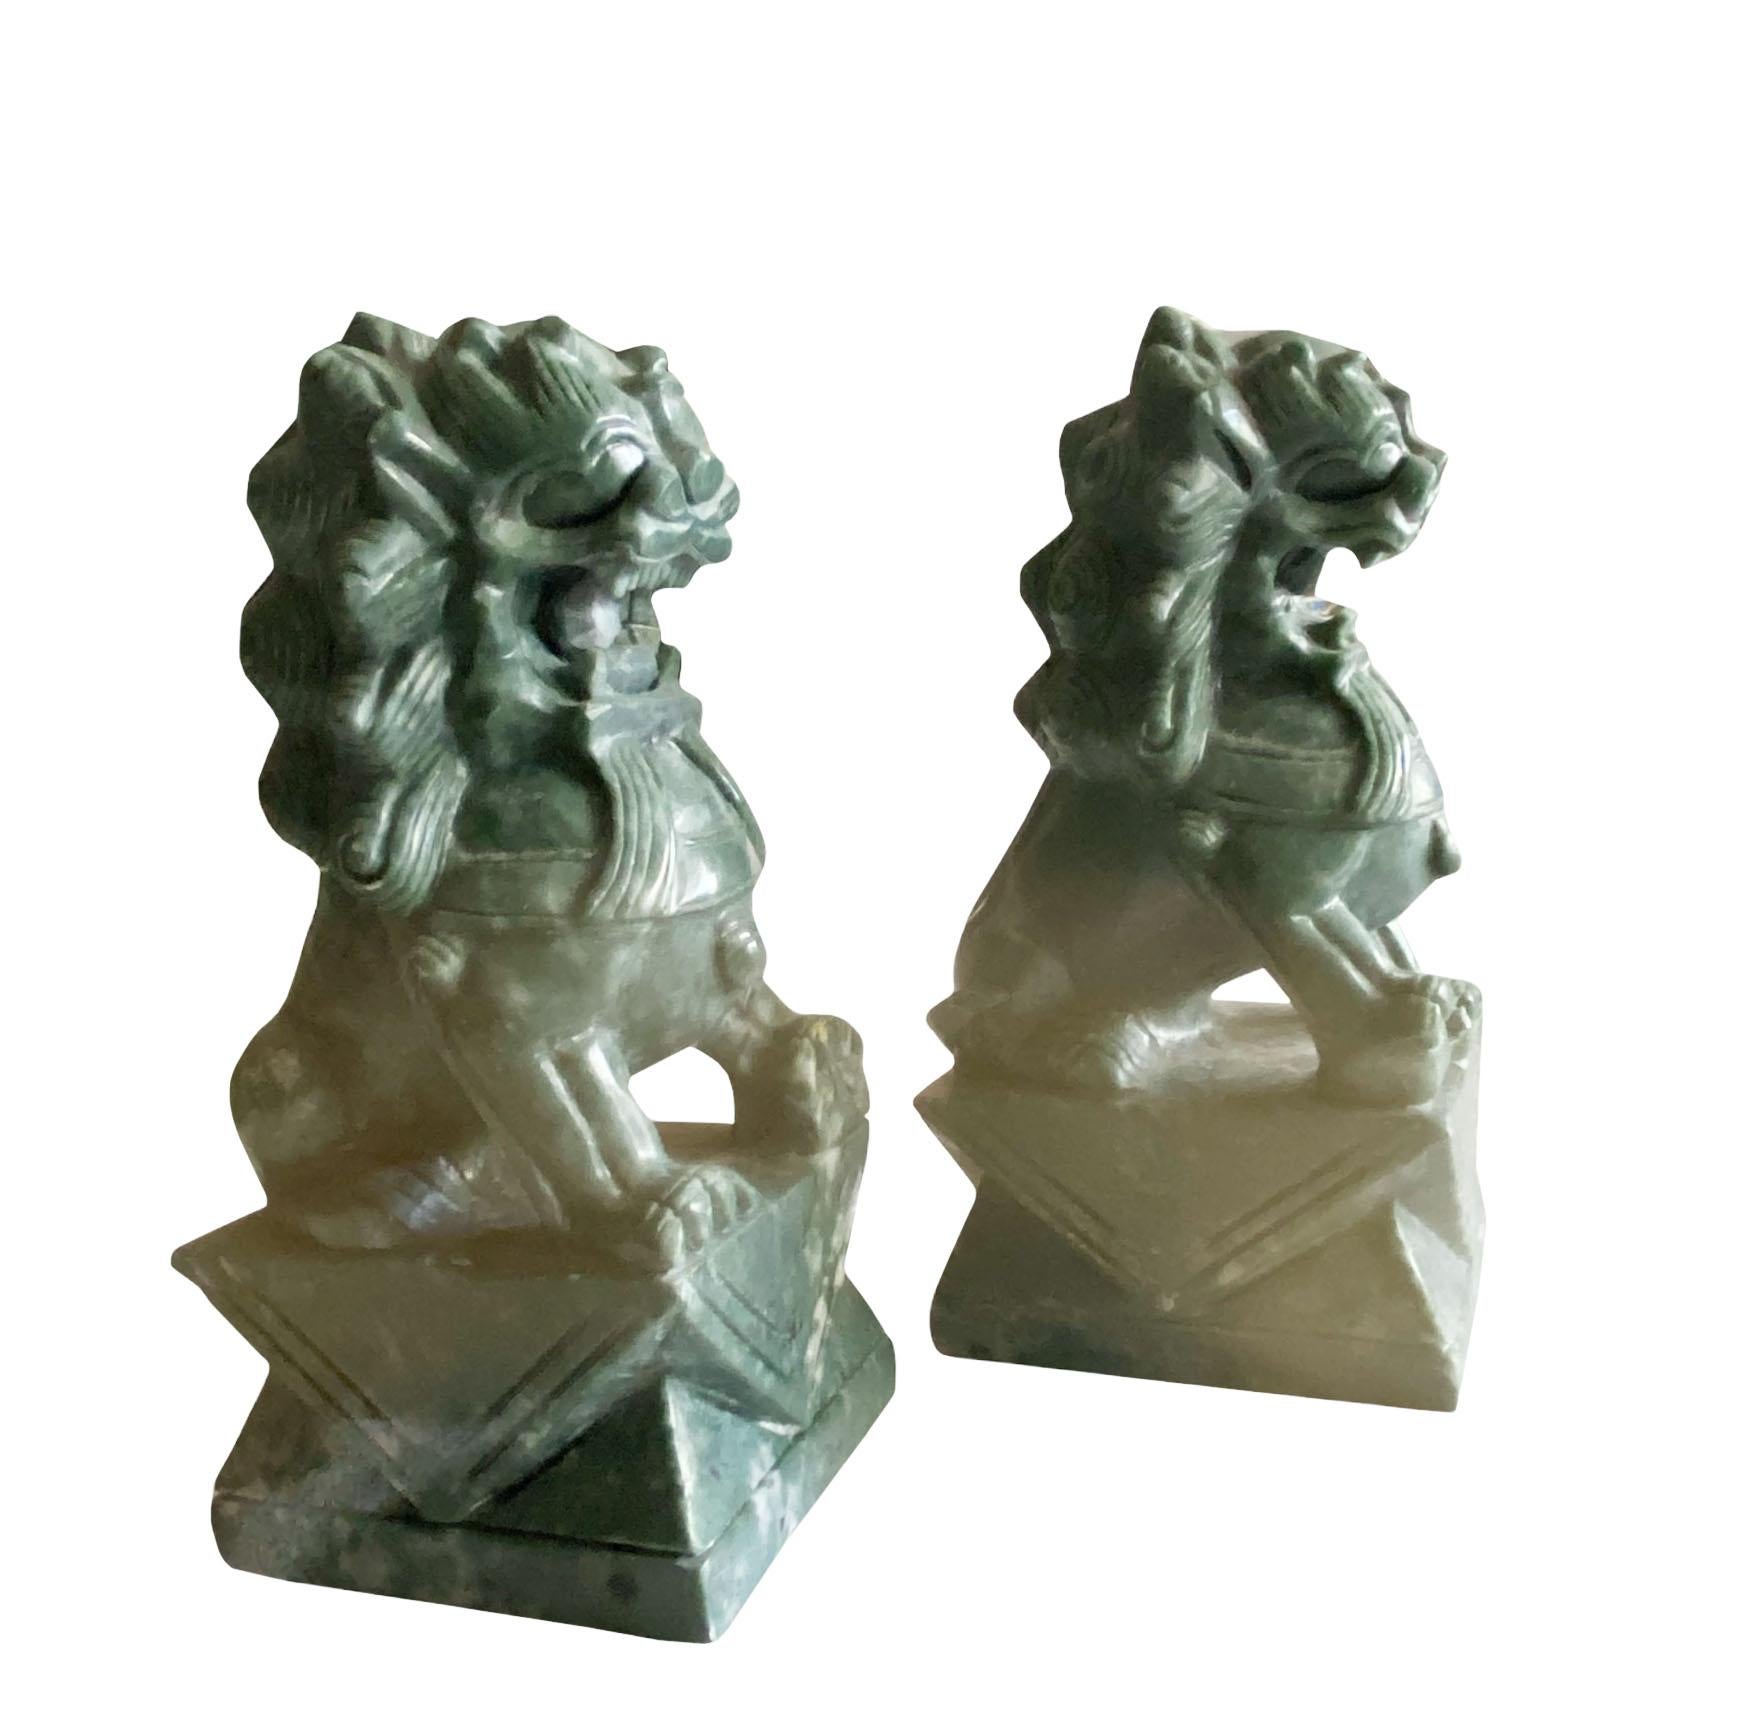 A pair of Chinese green stone foo dogs. Early 20th century, China.